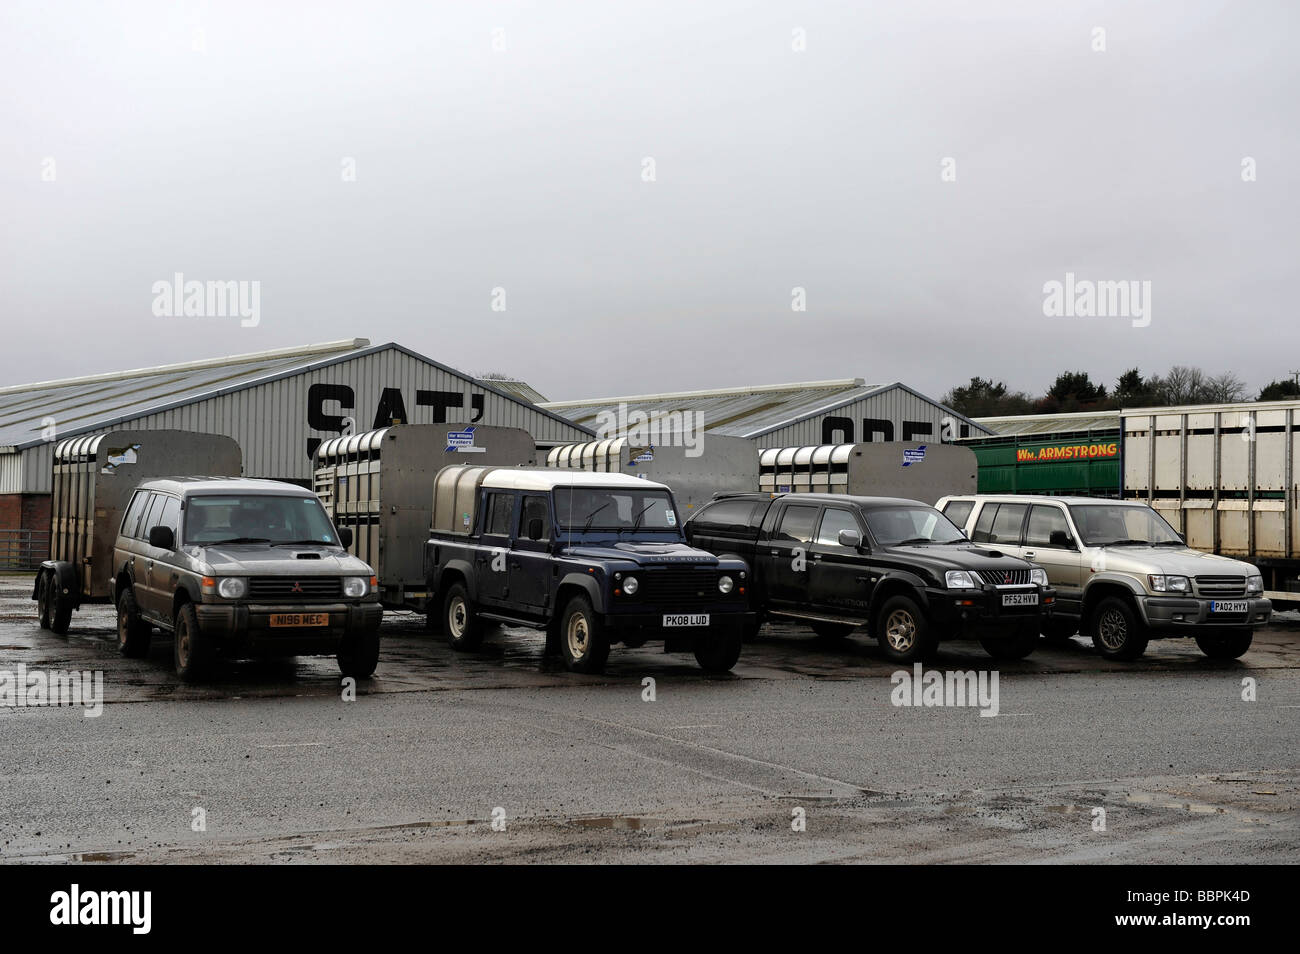 Farmers 4x4 offroad vehicles with livestock cattle trailers at Penrith Auction Mart Stock Photo